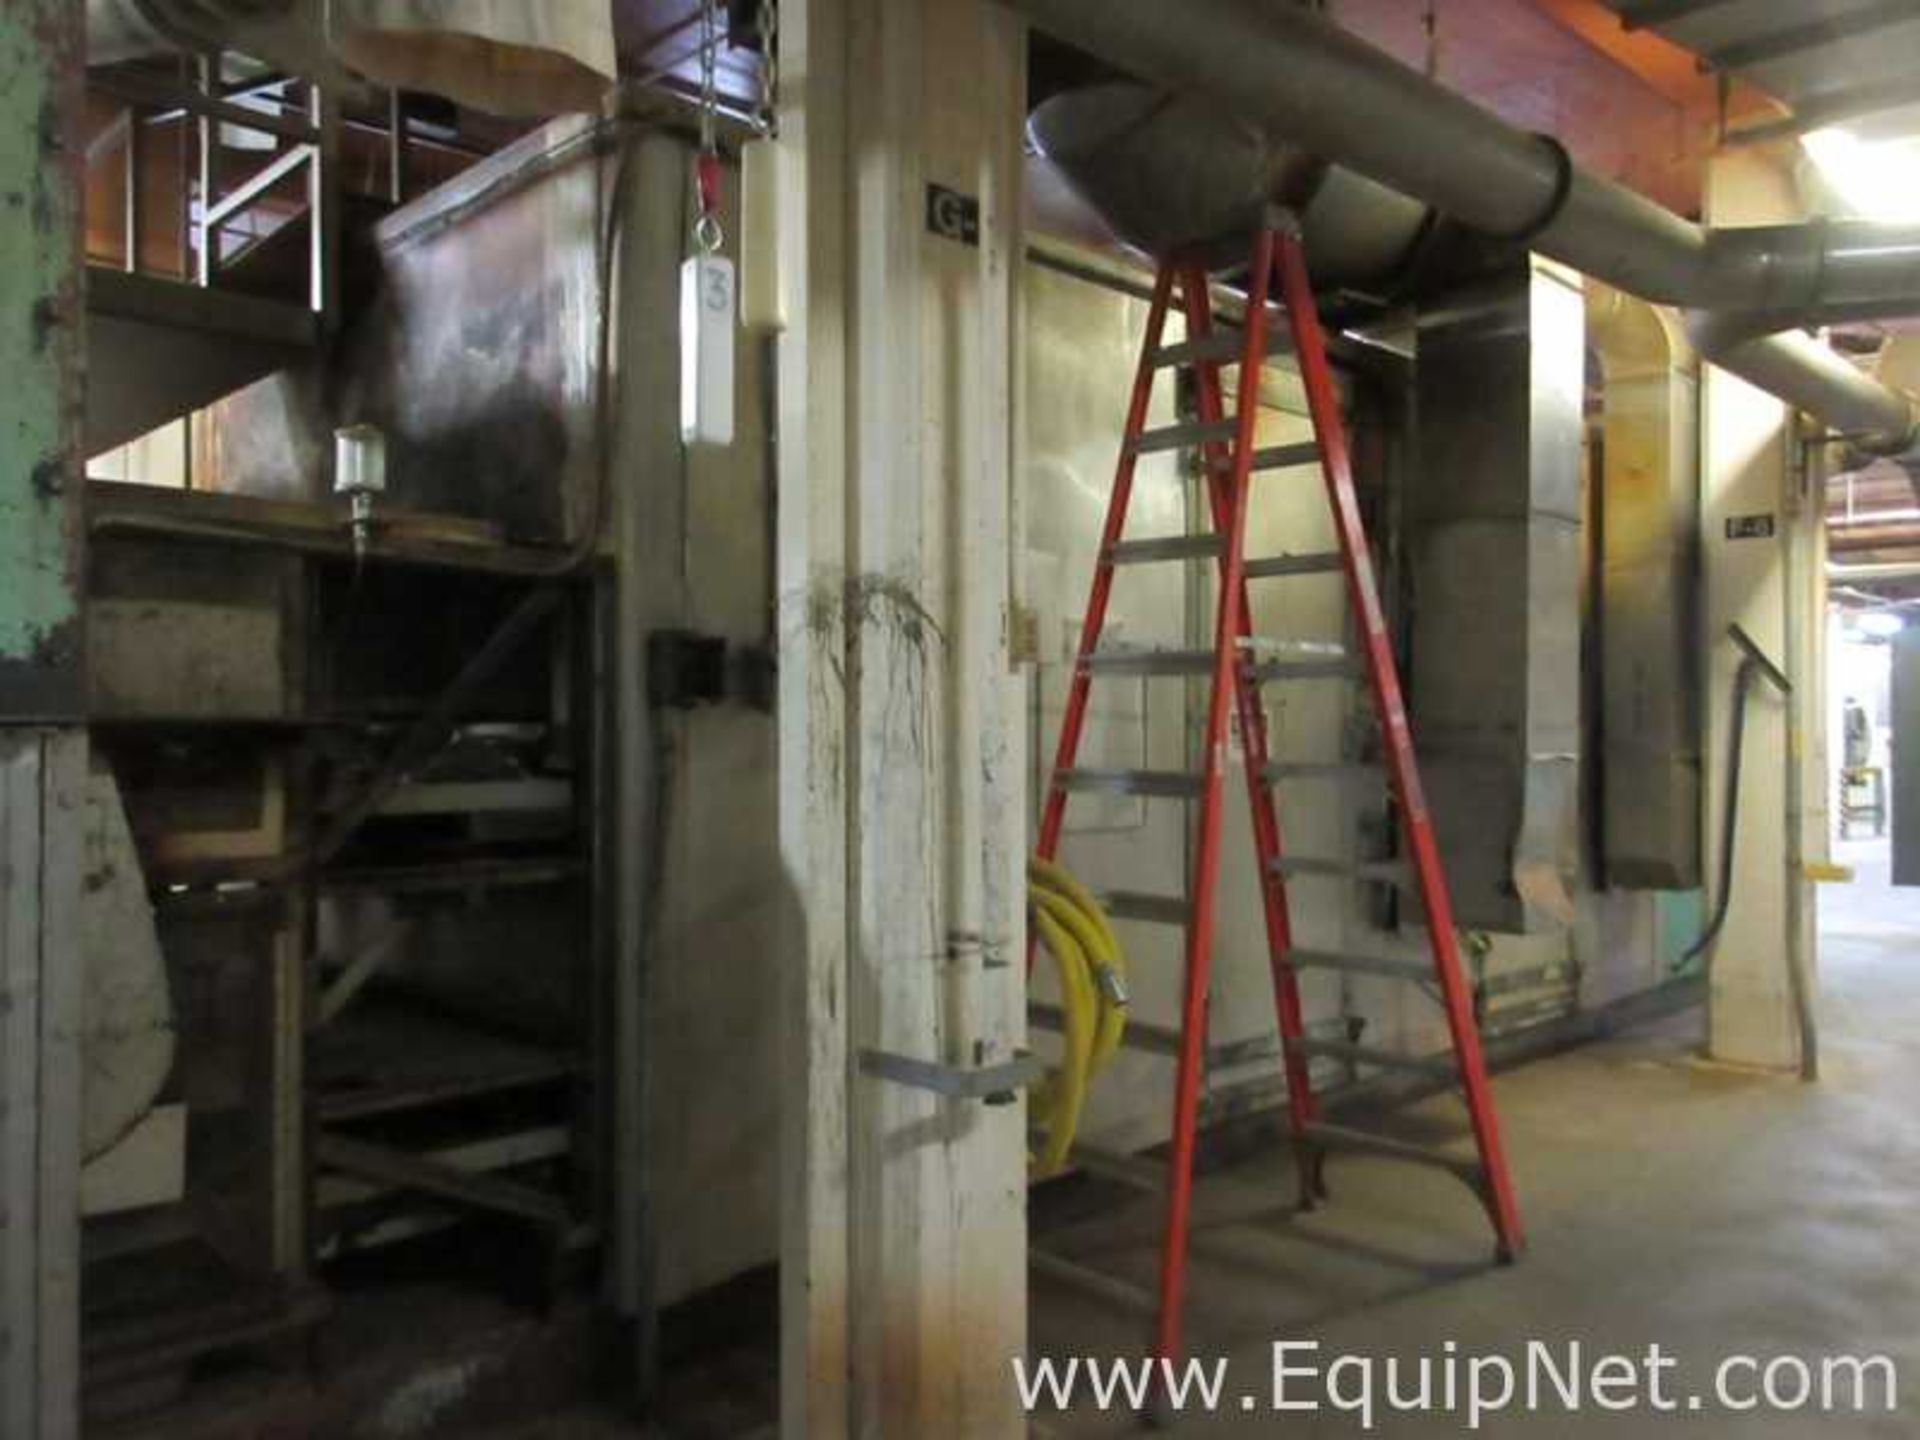 EQUIPNET LISTING #597061; REMOVAL COST: $0; DESCRIPTION: National Drying Machinery Belt - Image 19 of 27